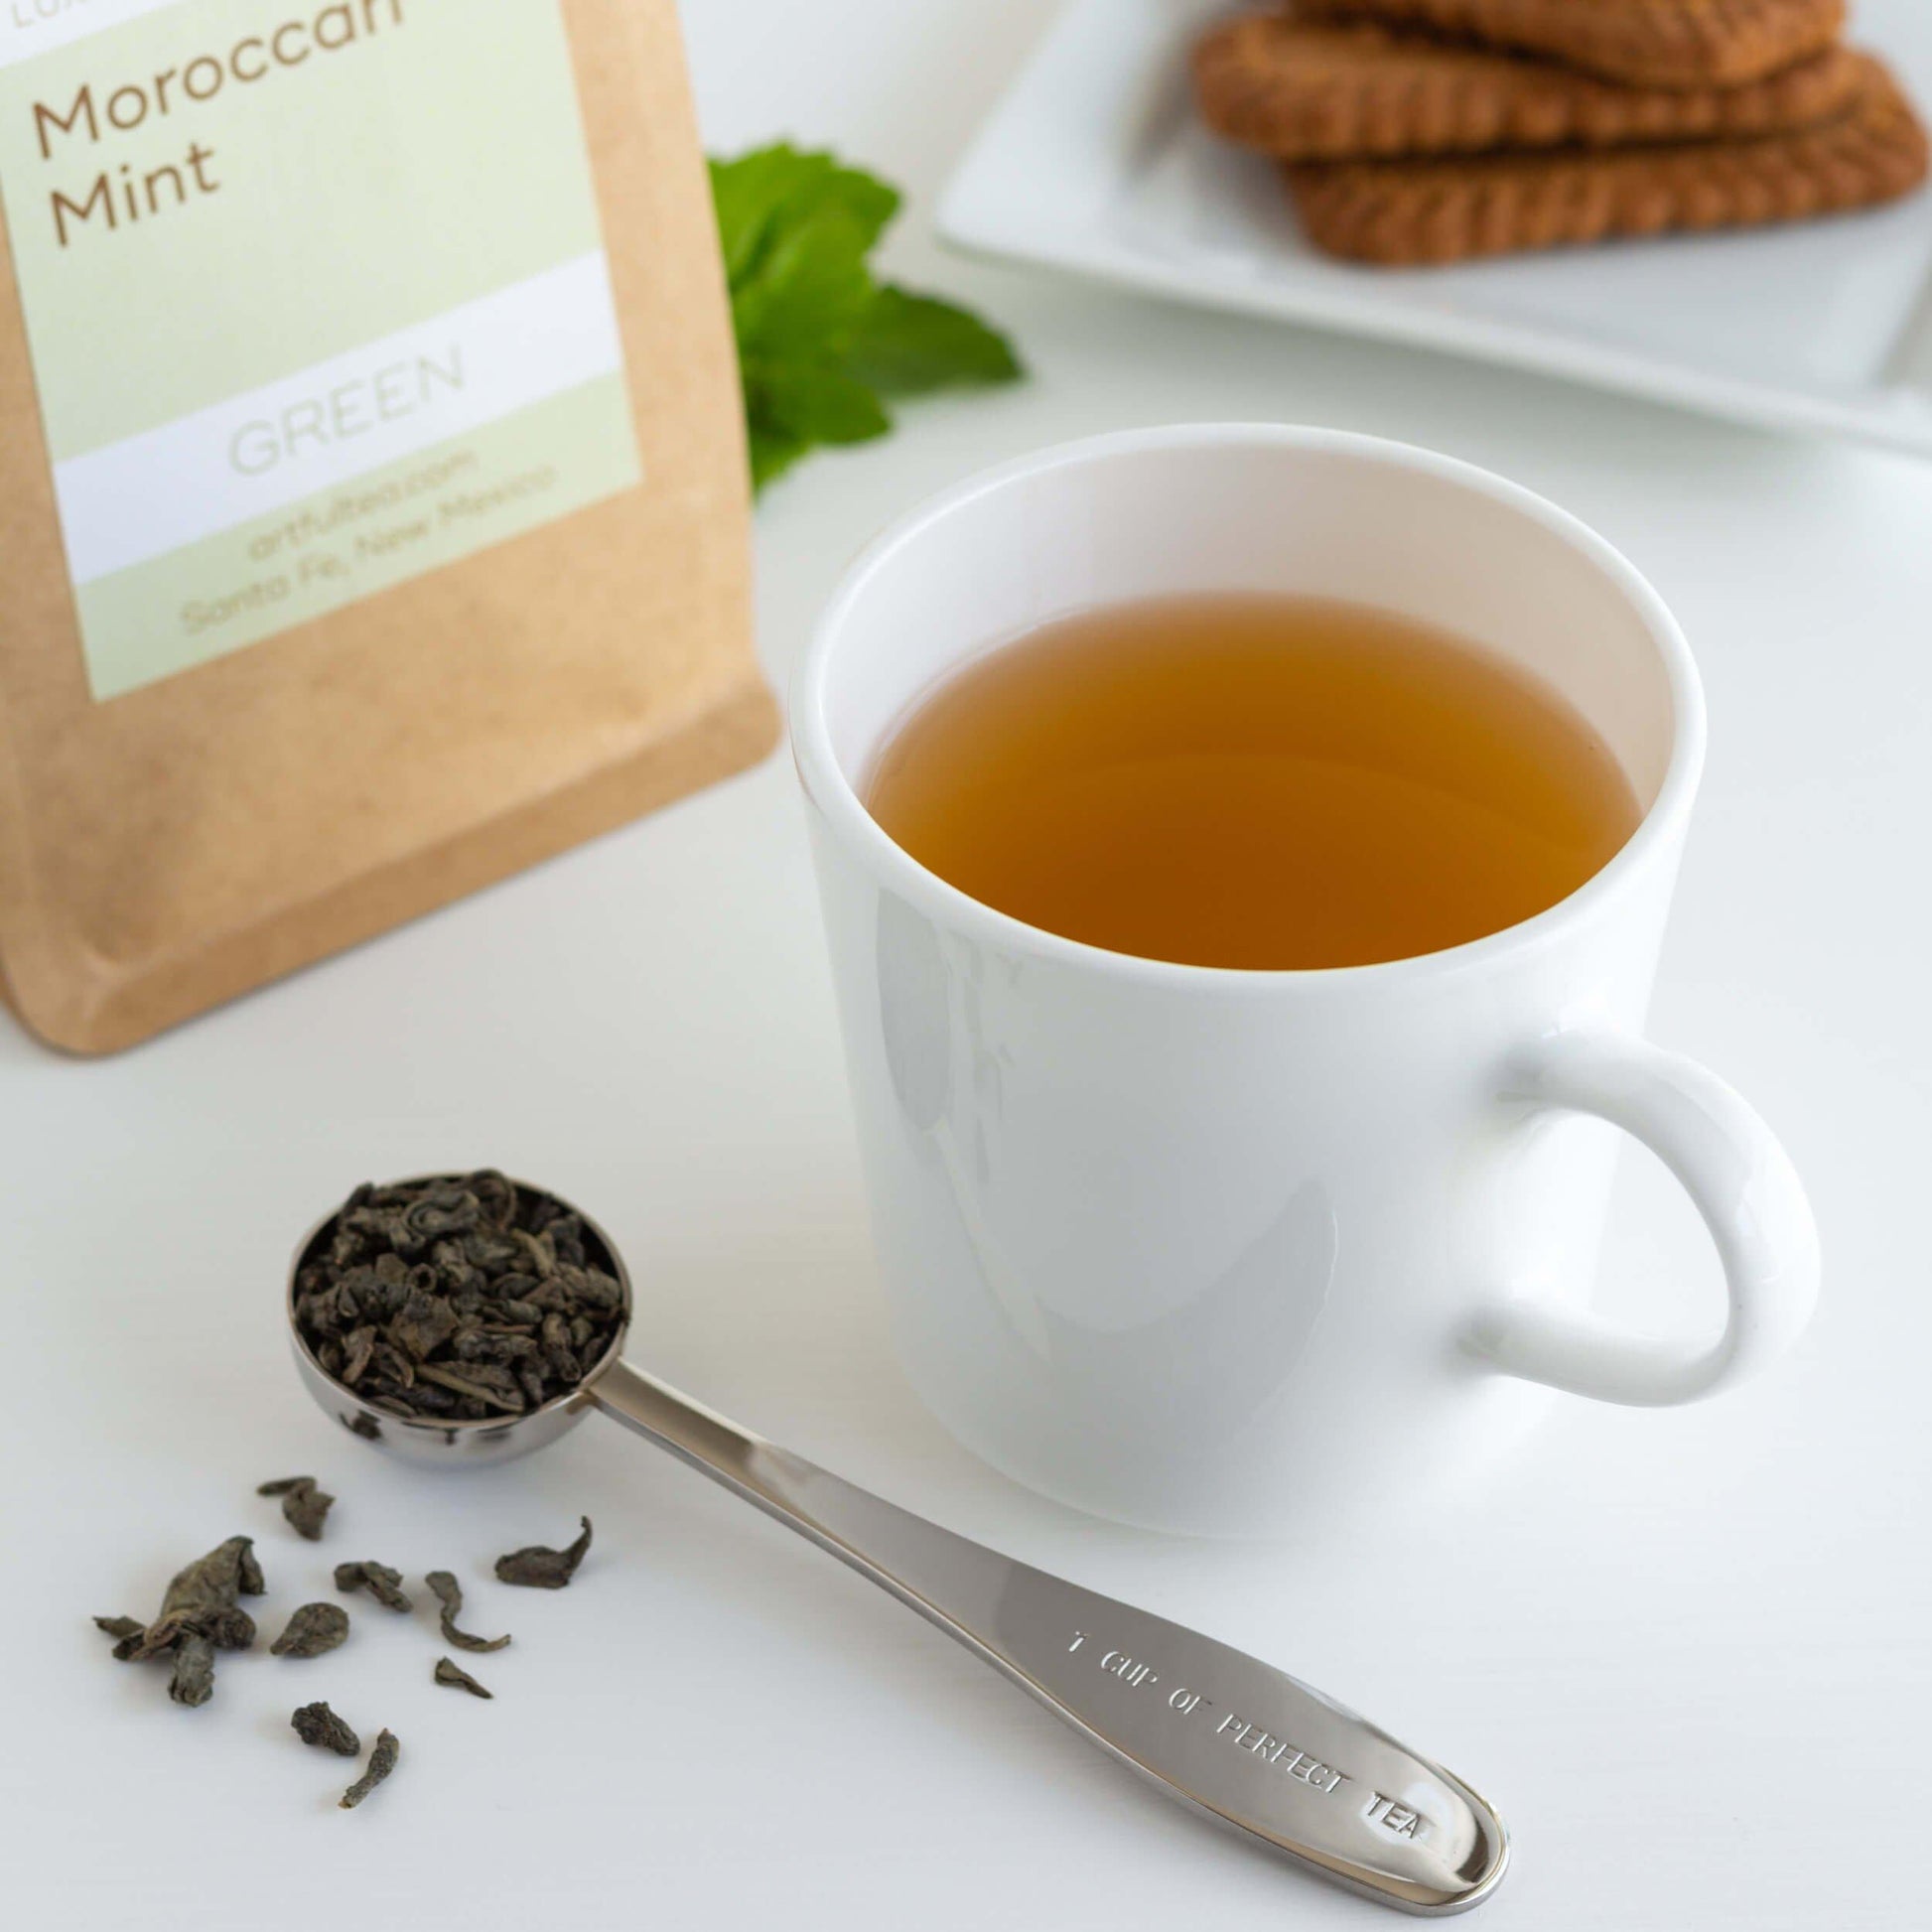 Moroccan Mint Green Tea shown as brewed tea in a white cup with a scoop of loose tea leaves nearby. A kraft bag of packaged tea and three cookies are on a white dish in the background